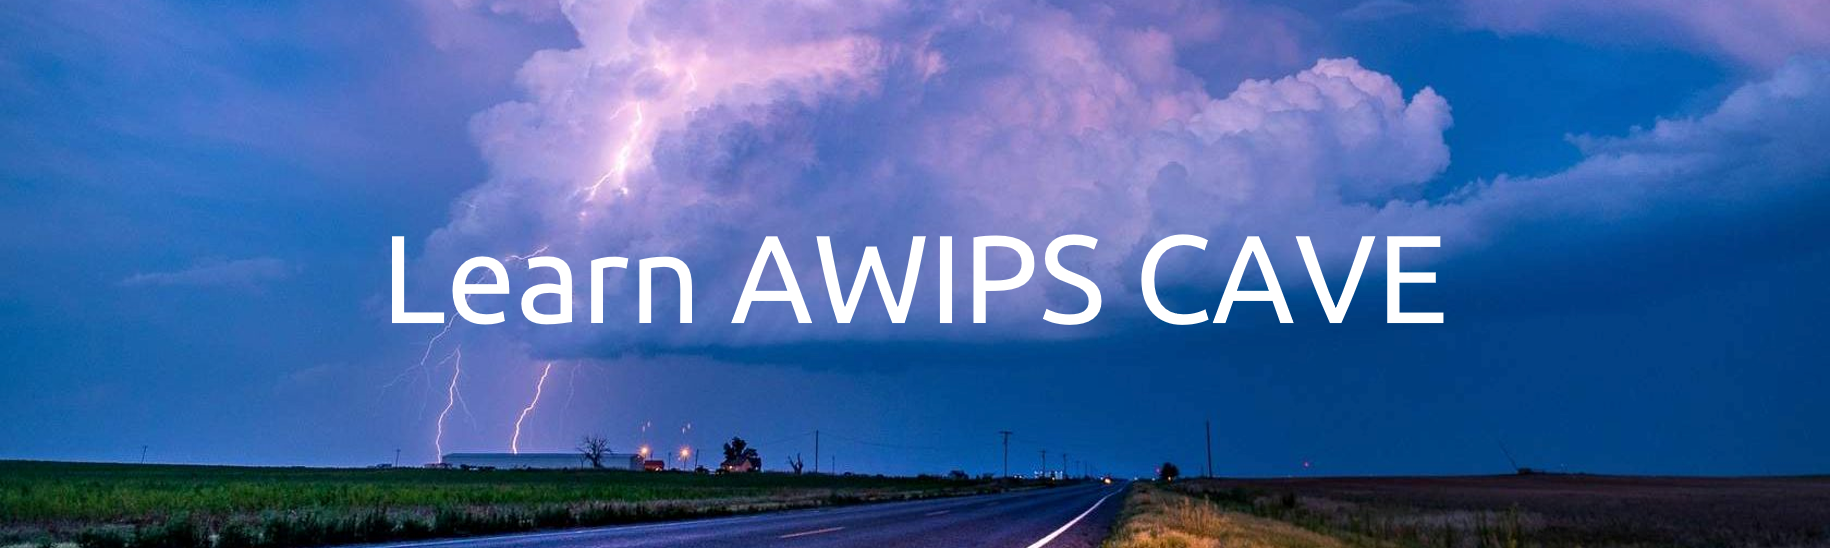 Learn AWIPS CAVE Banner